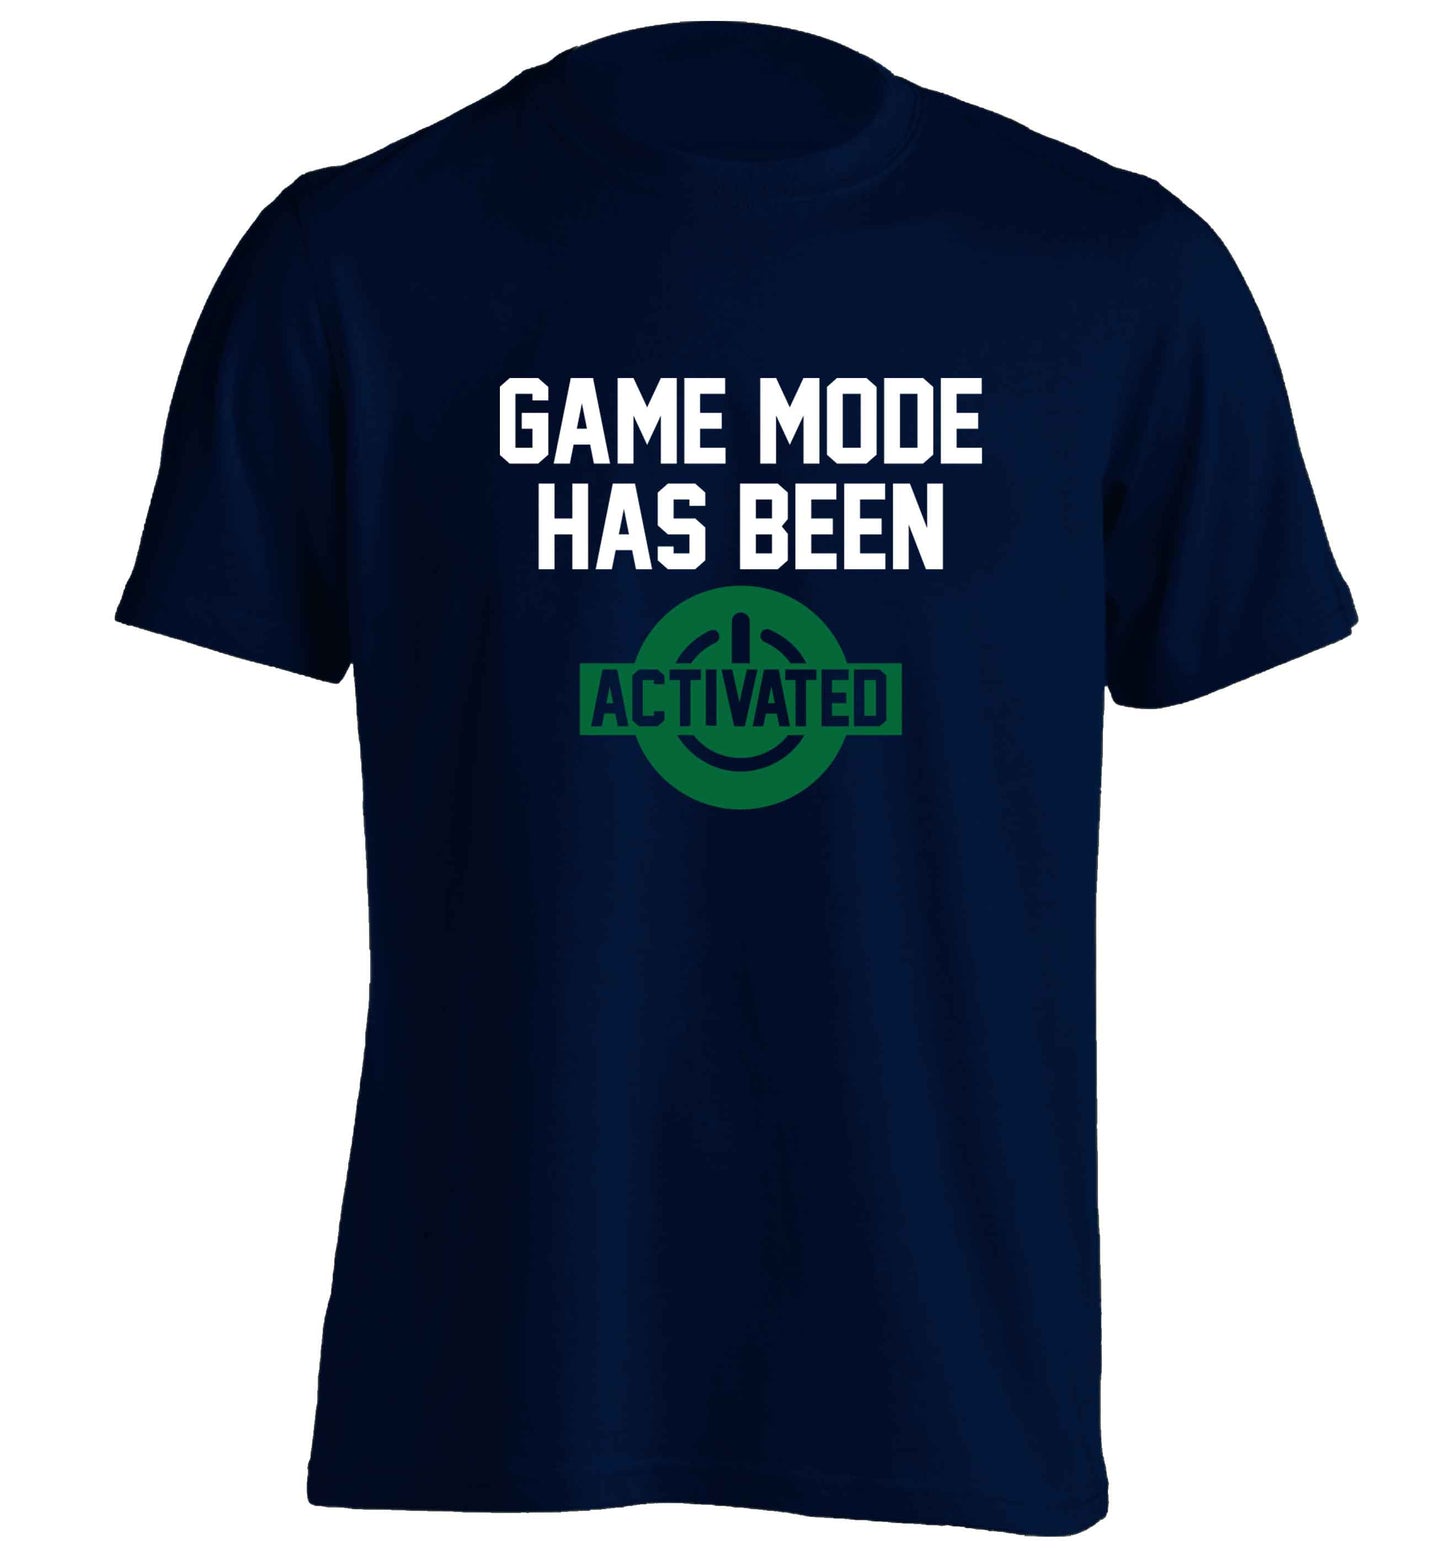 Game mode has been activated adults unisex navy Tshirt 2XL